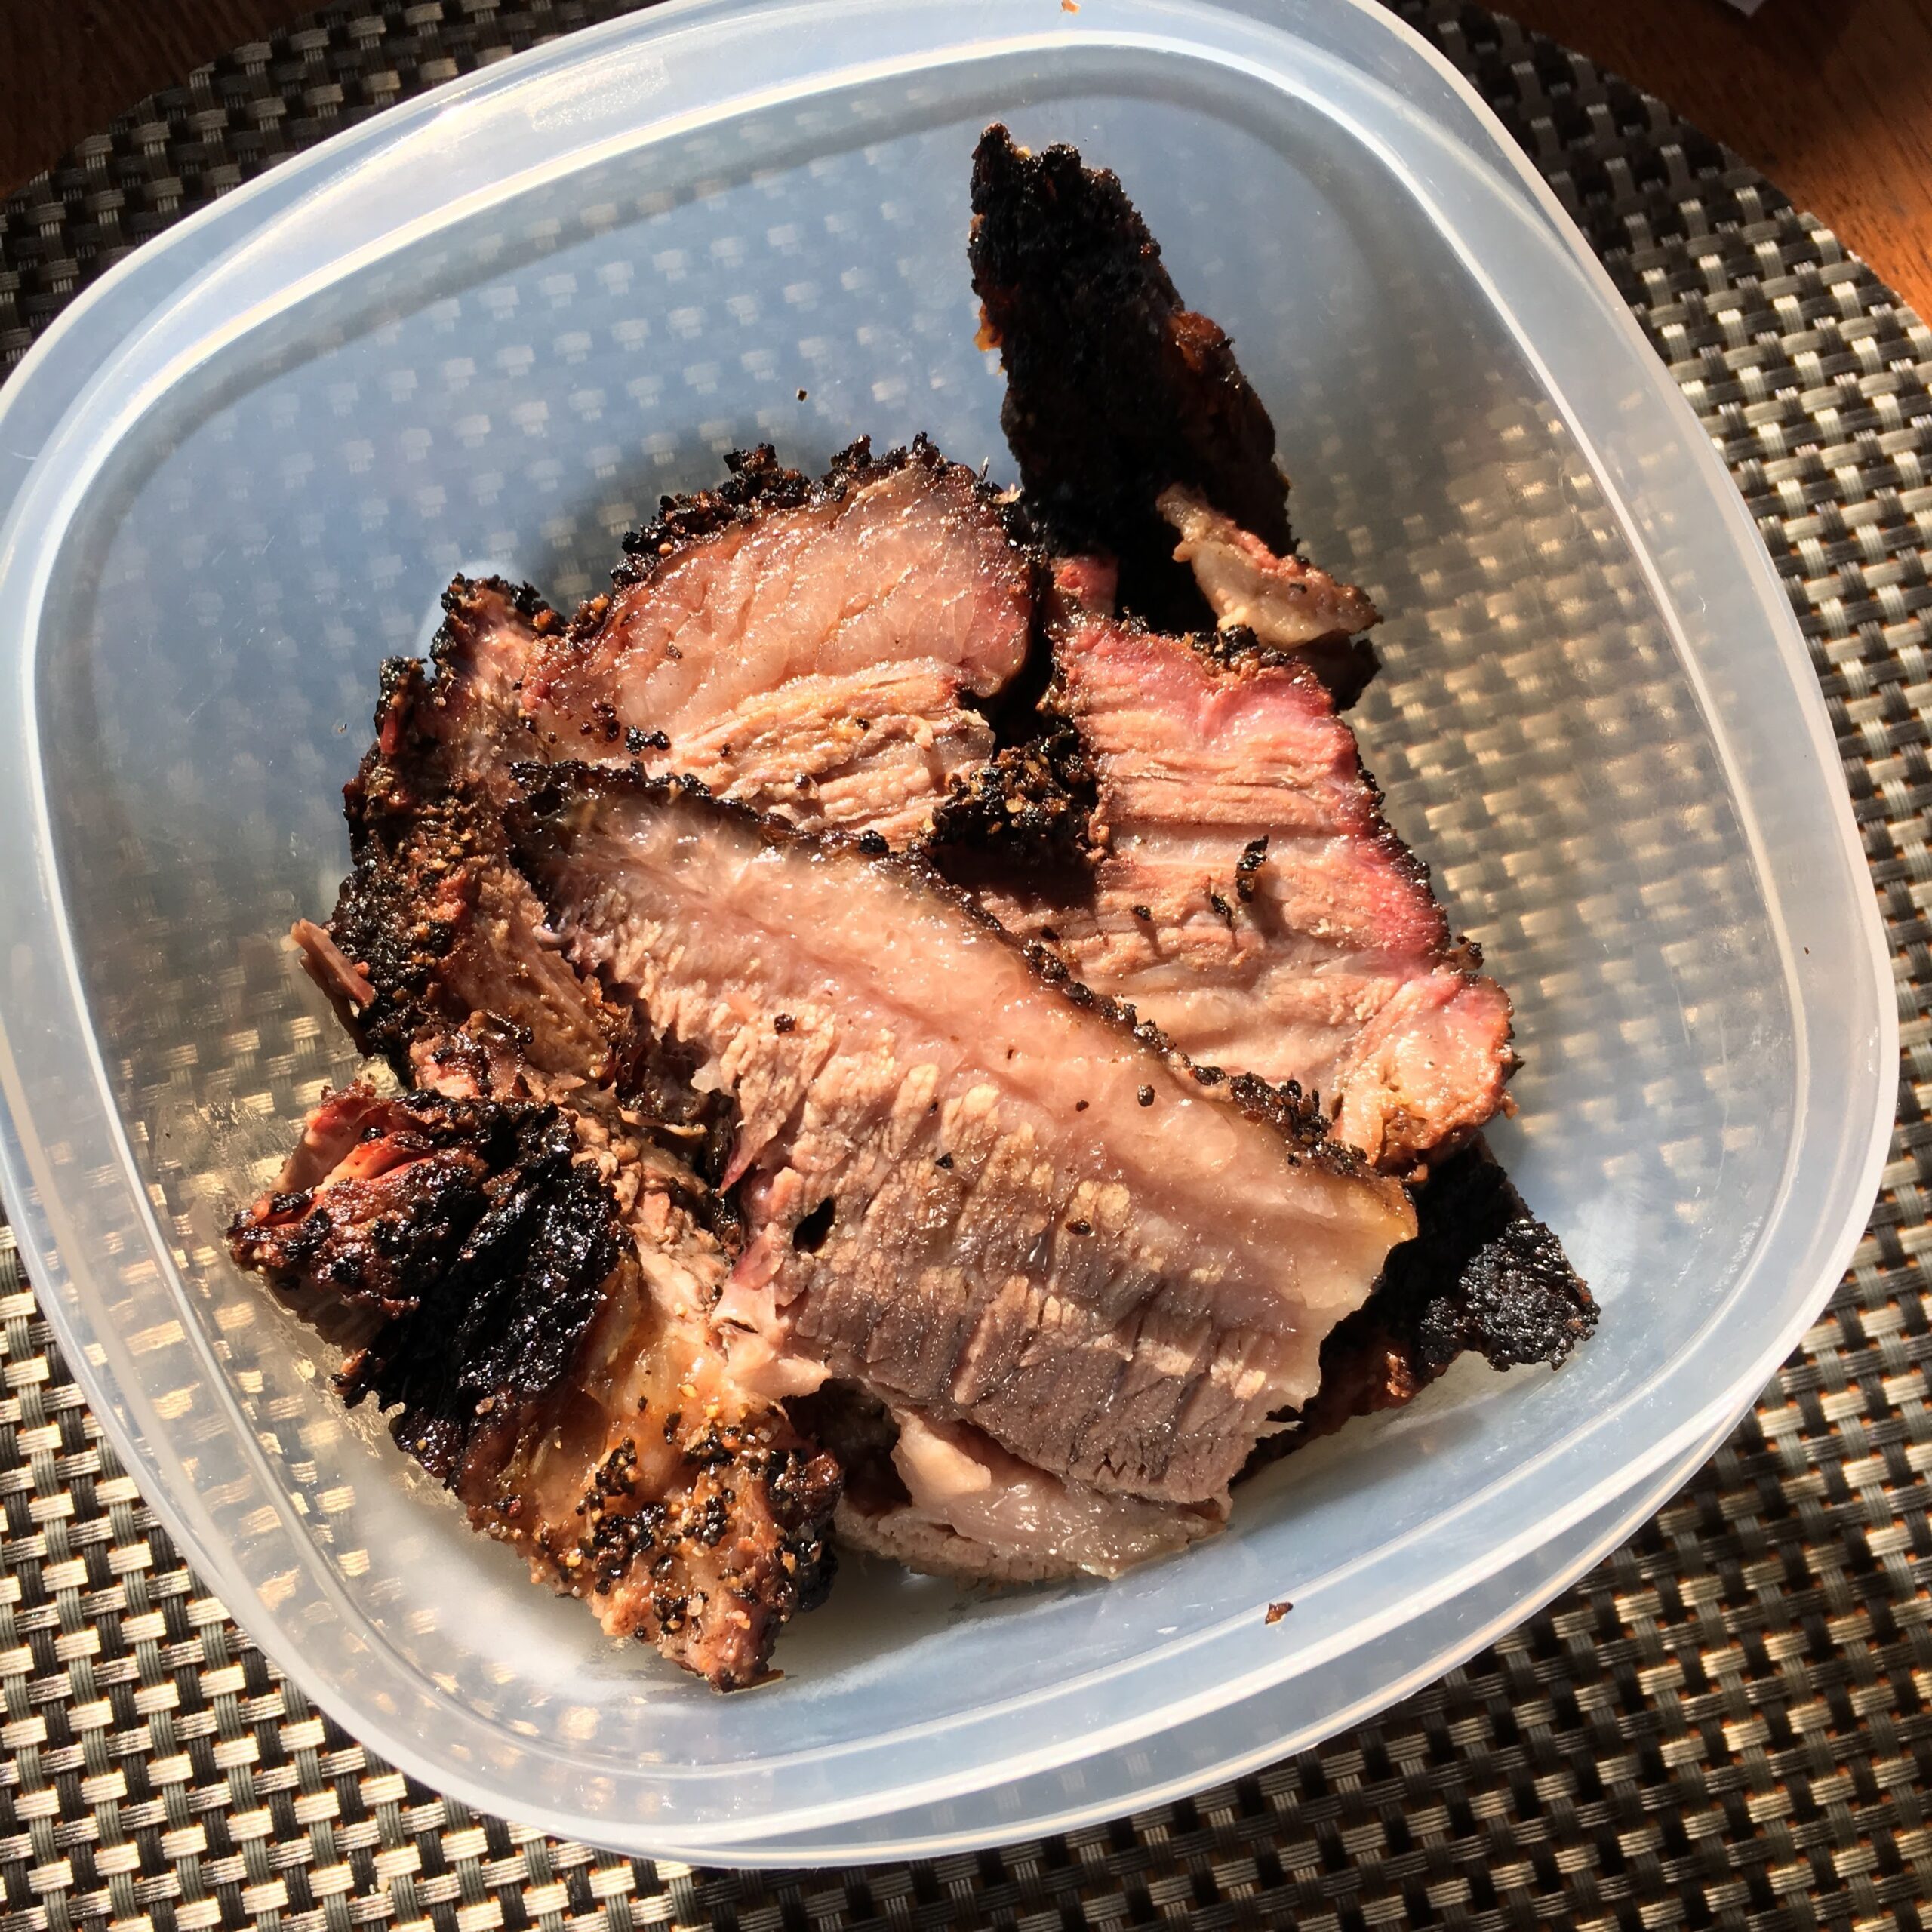 How To Soften Tough Brisket | 6 Quick Tips!